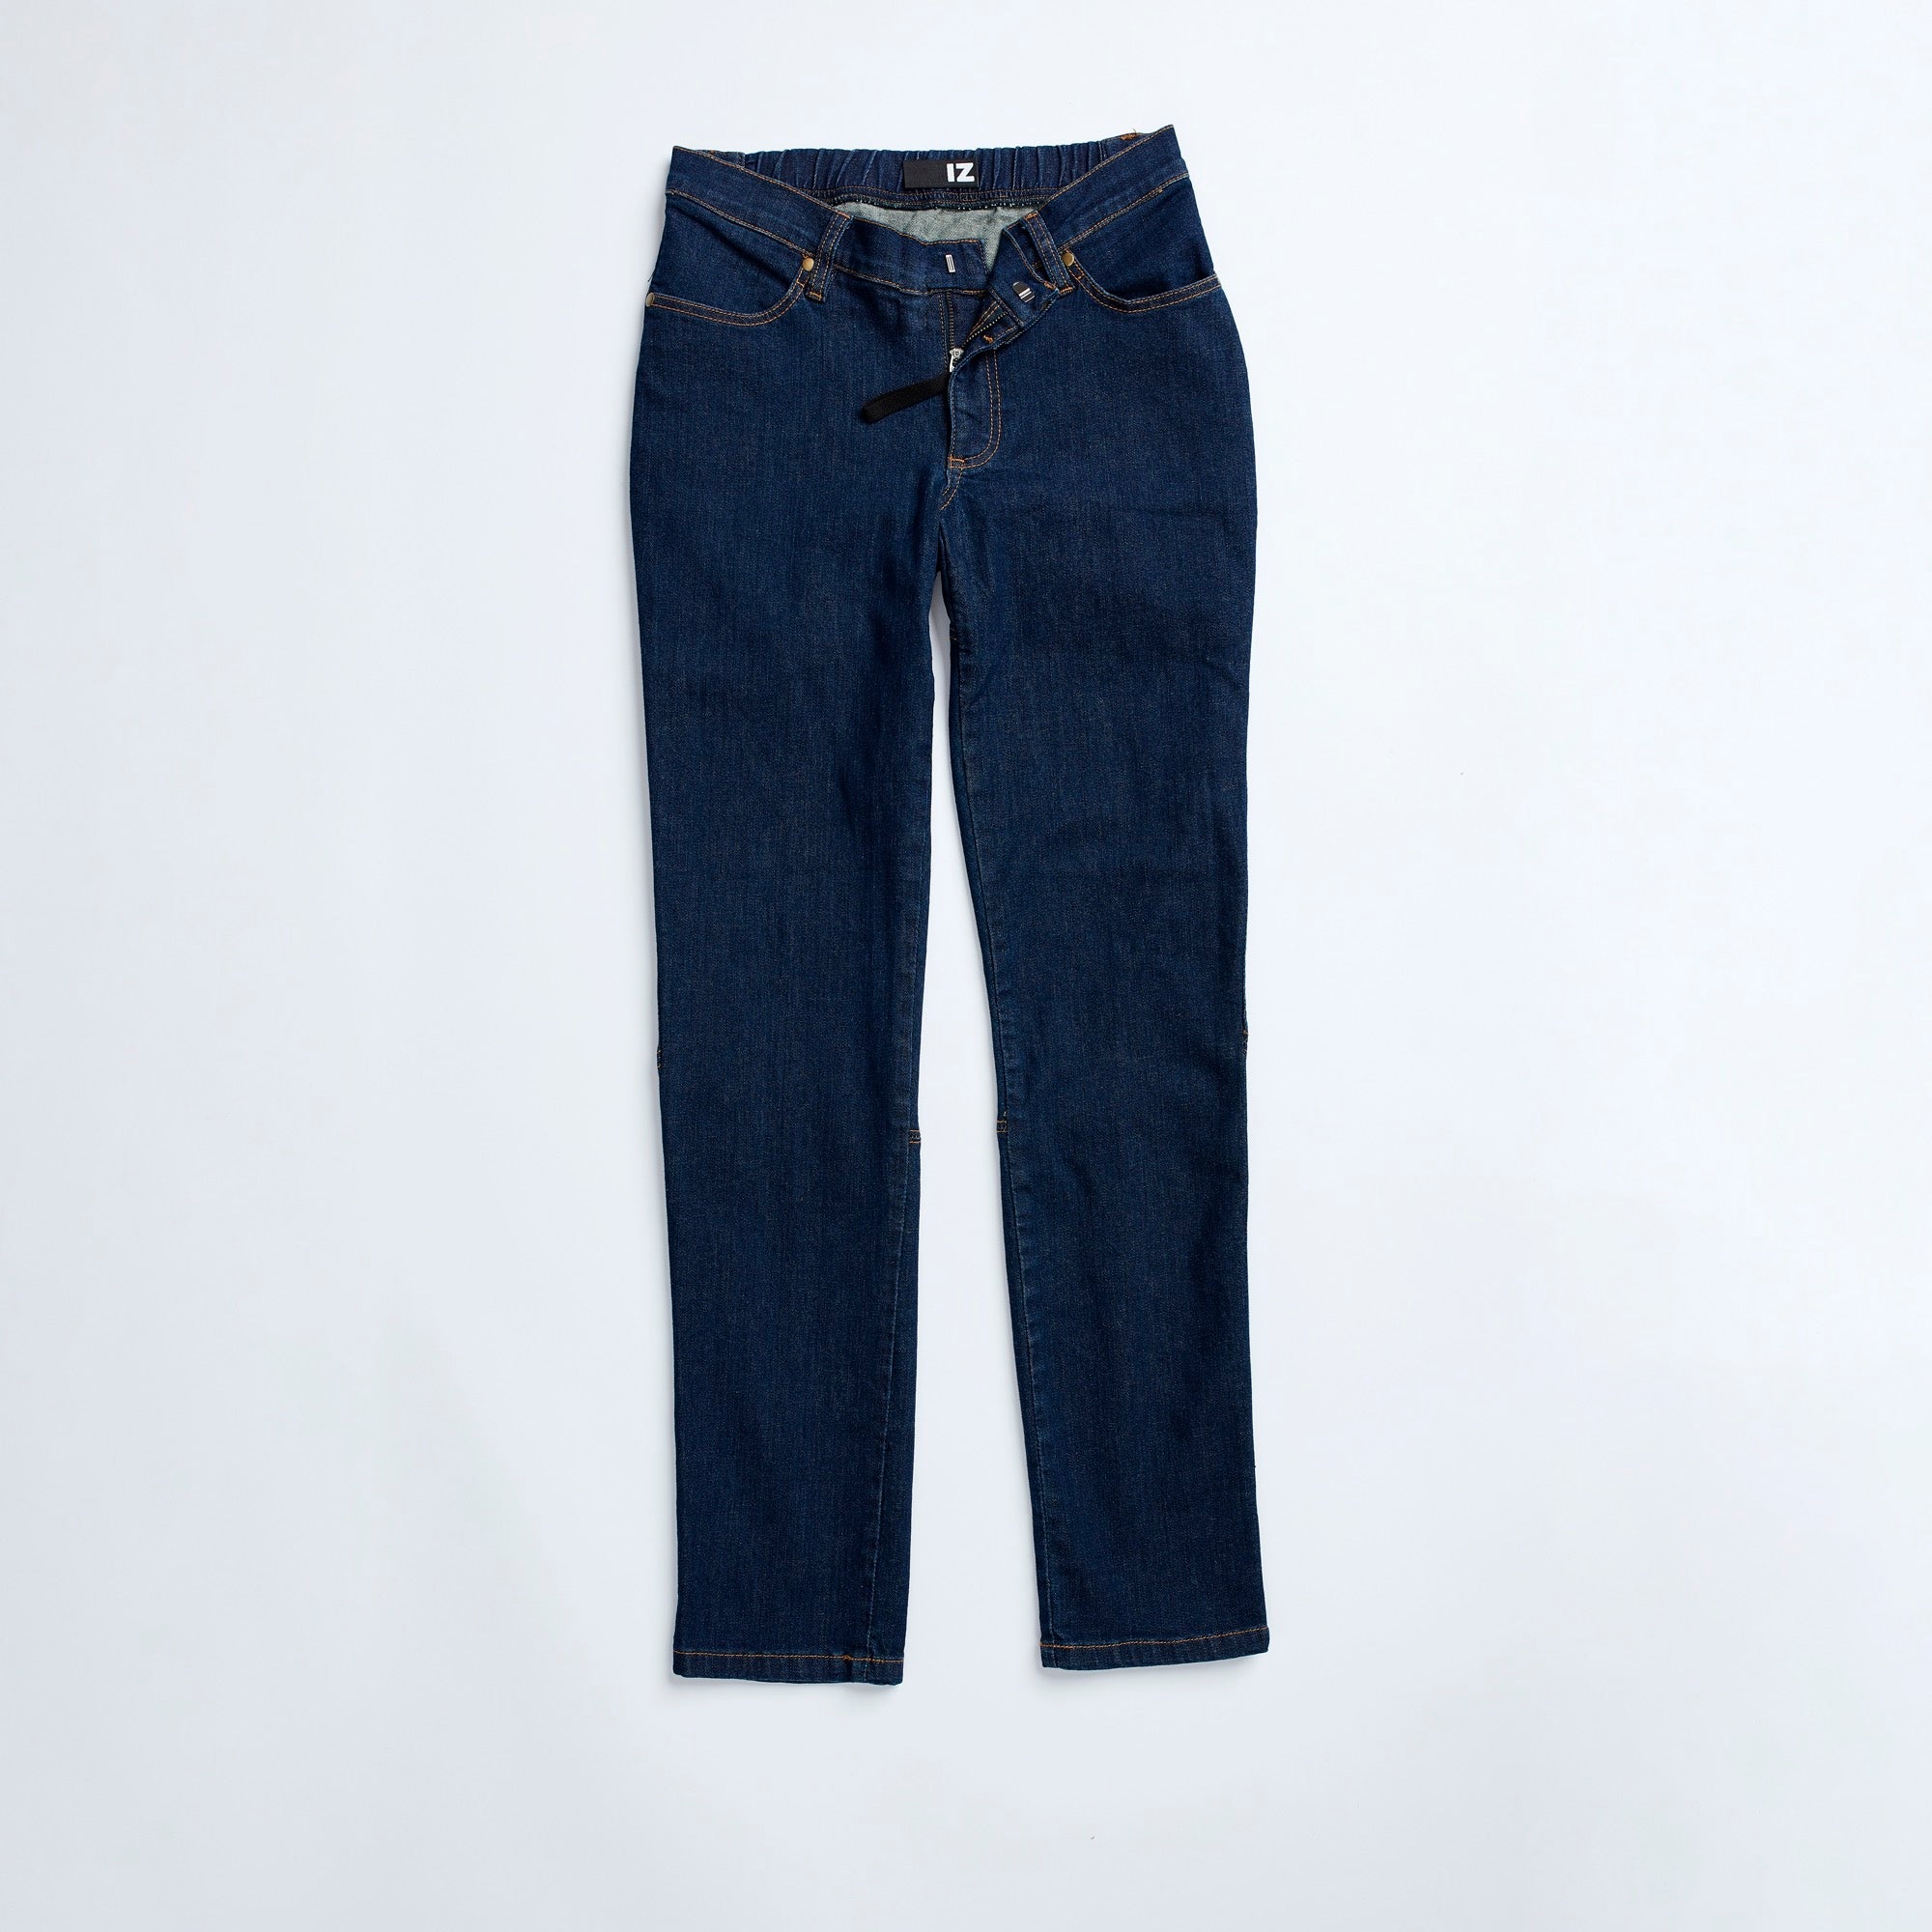 High waisted jeans zip at back  Zippers fashion, Blue denim pants, Women  jeans